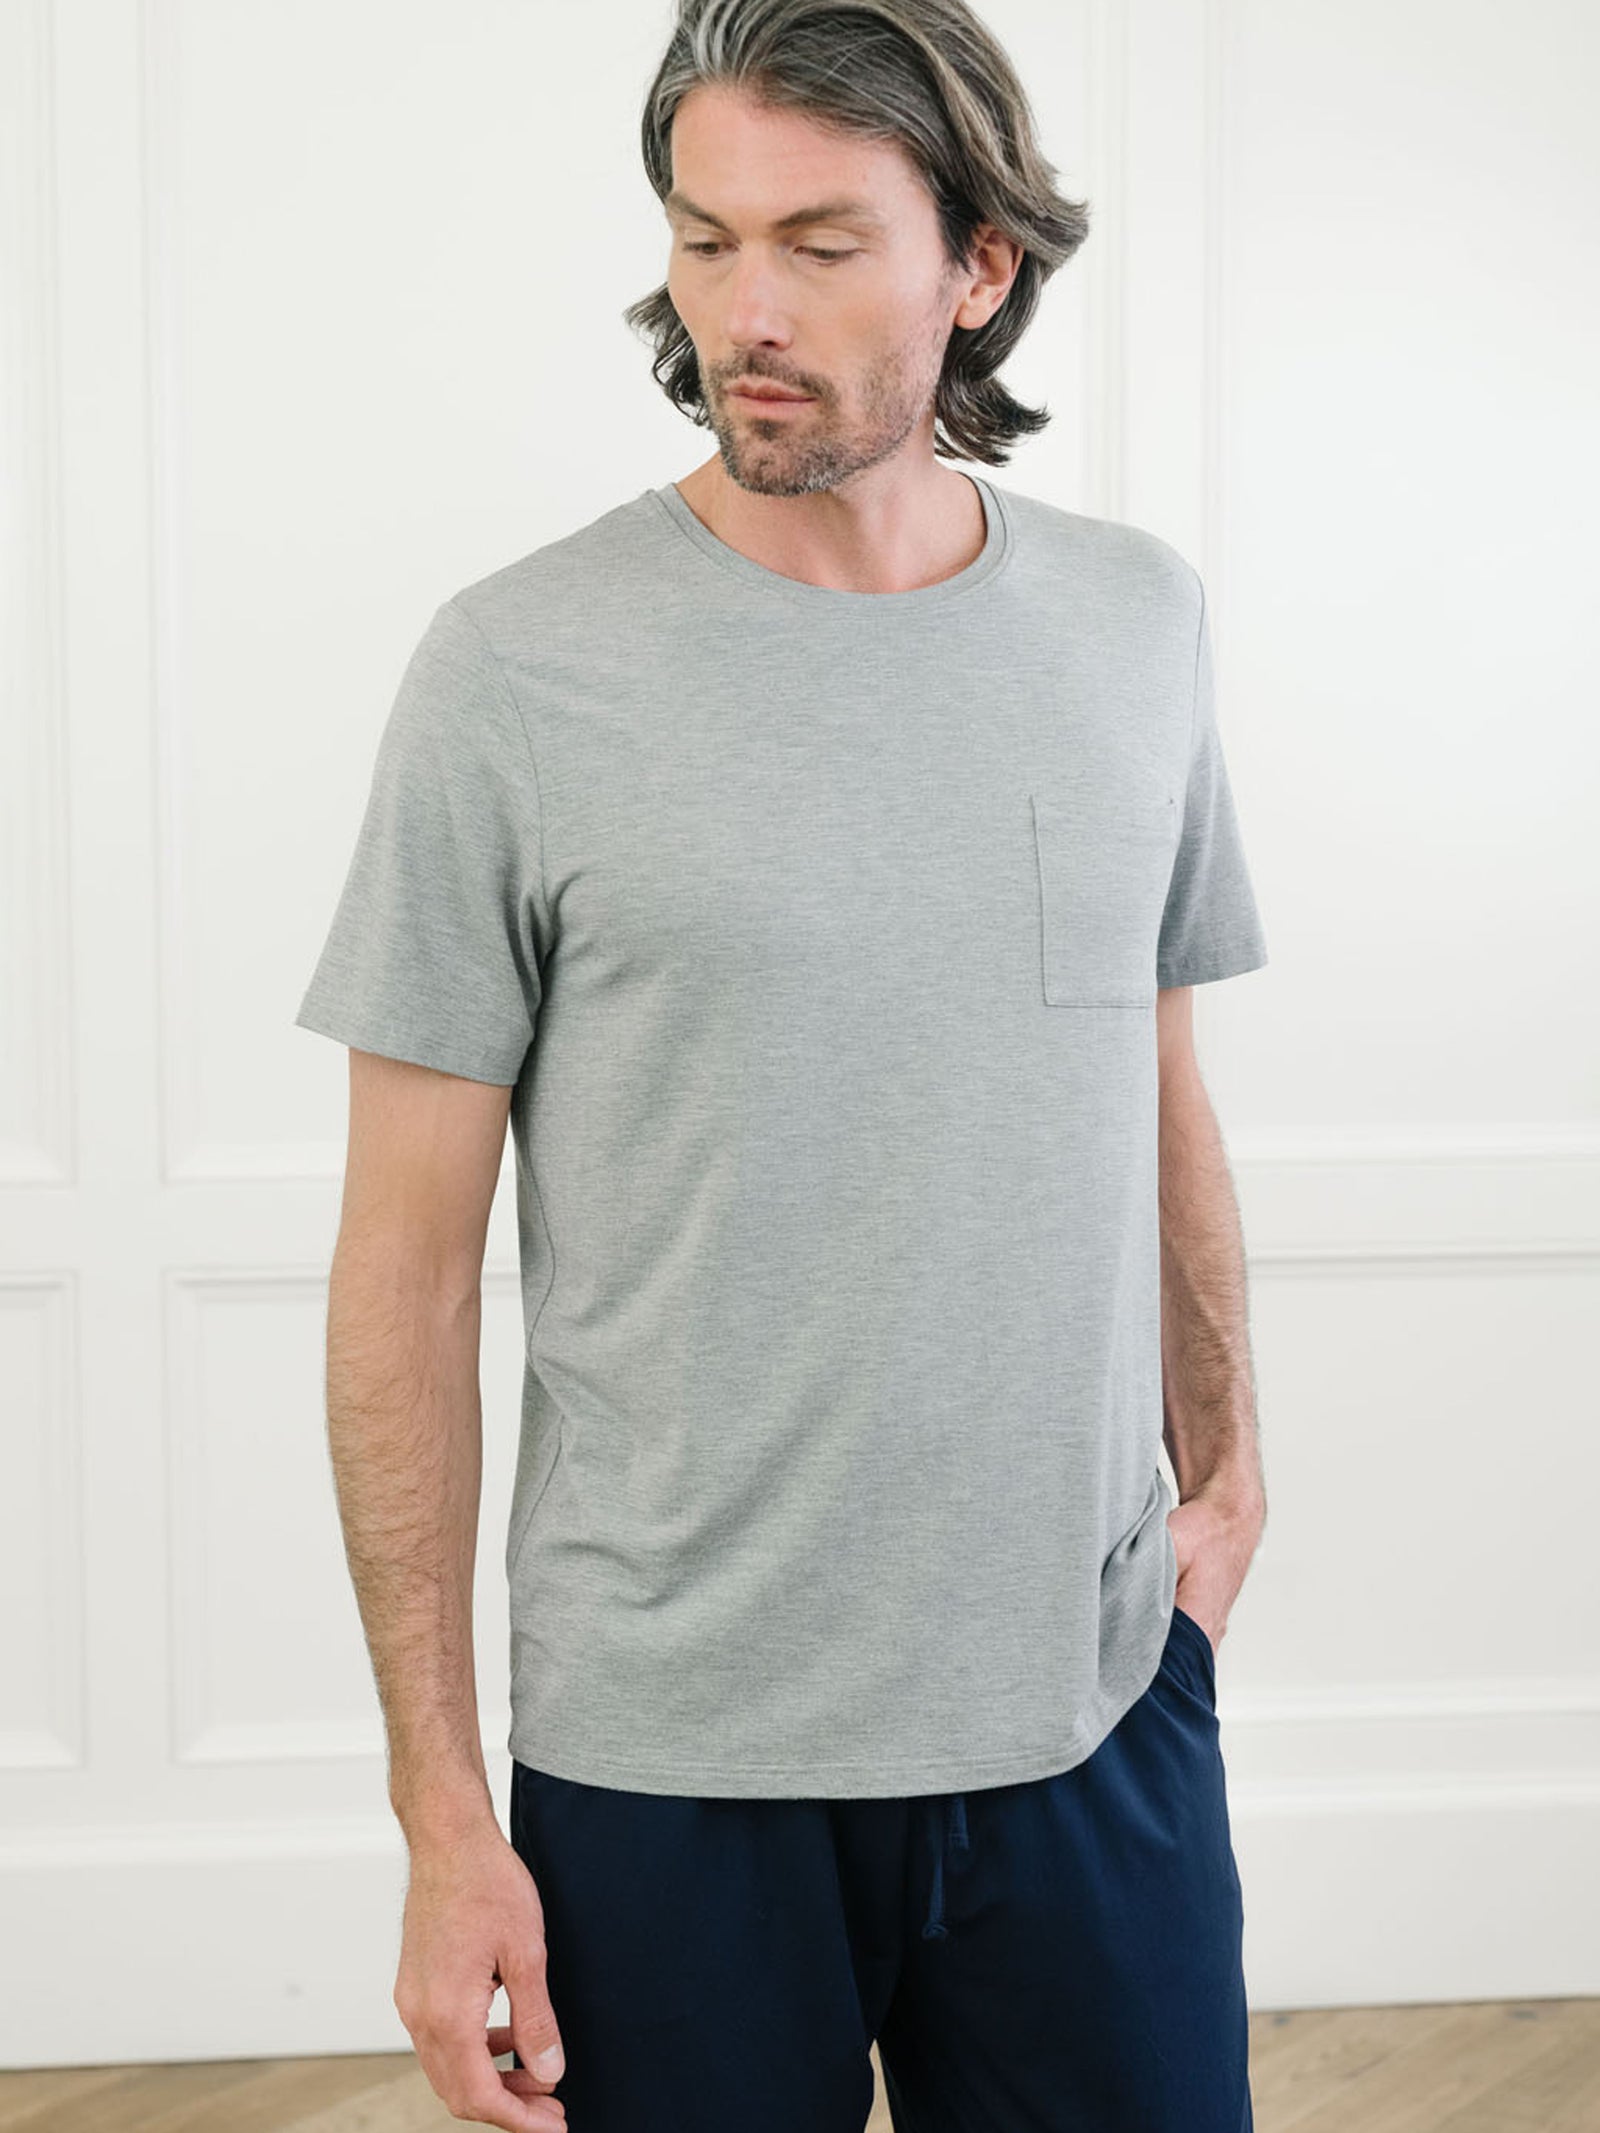 Heather grey Men's Stretch-Knit Bamboo Lounge Tee. A man is wearing the lounge tee in a well lit home.